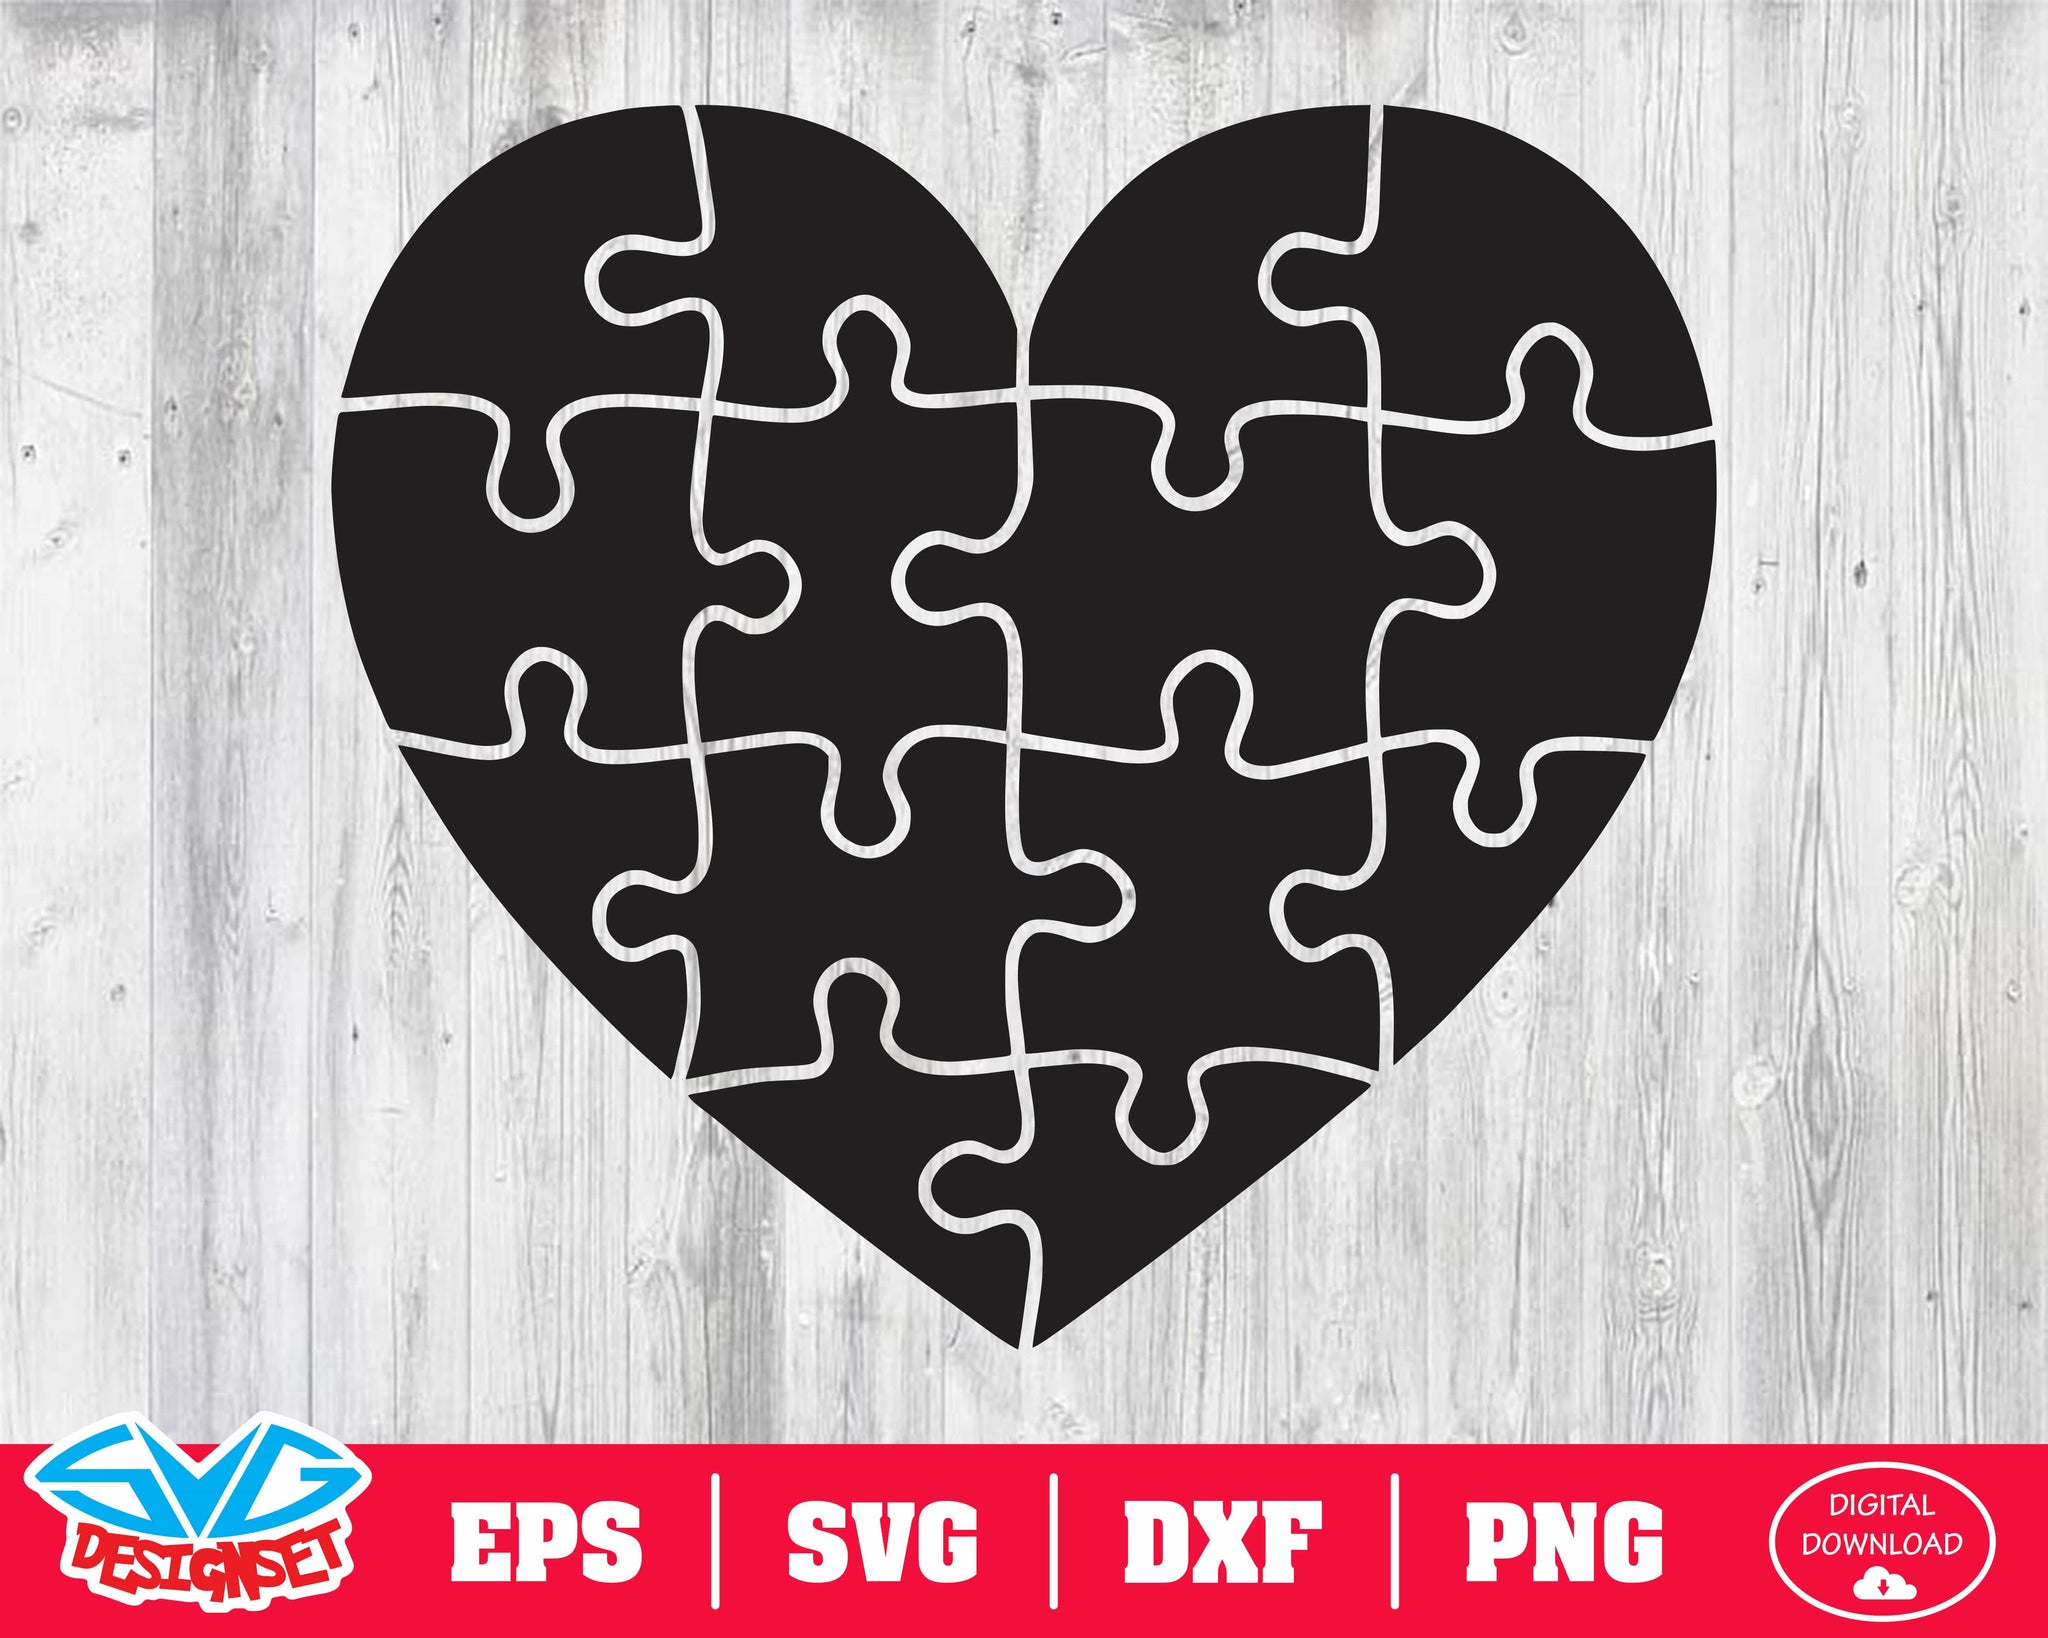 Puzzle heart Svg, Dxf, Eps, Png, Clipart, Silhouette and Cutfiles #1 - SVGDesignSets